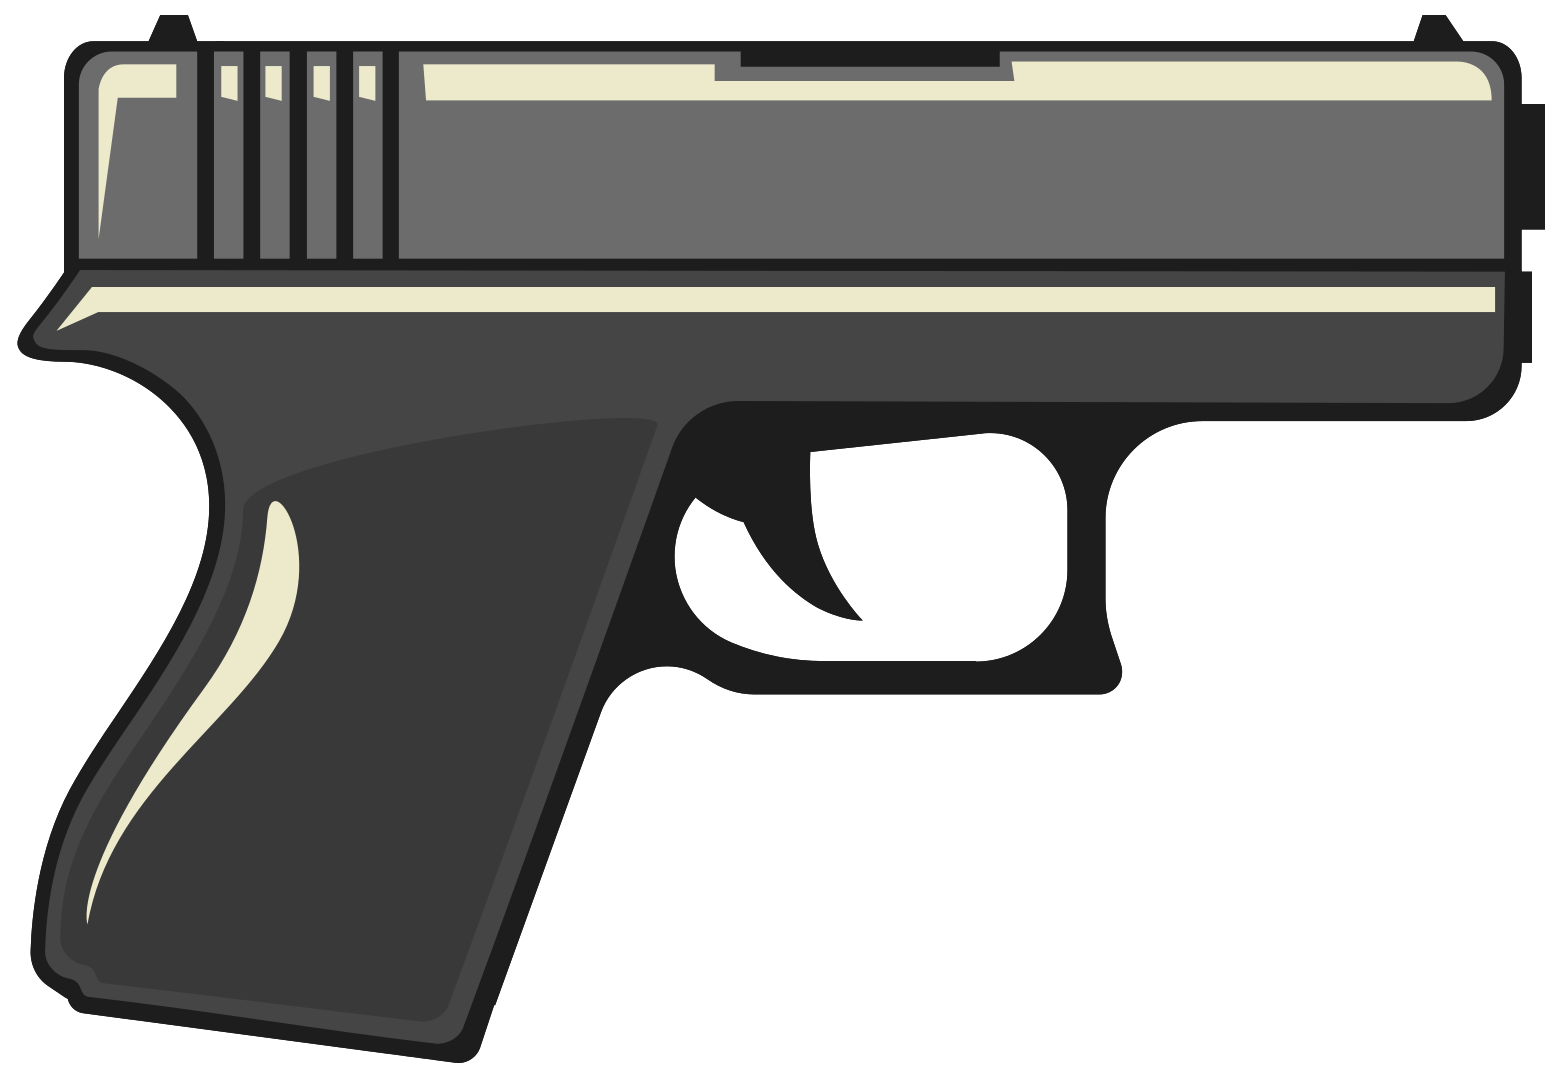 Download gun png image with transparent background. 